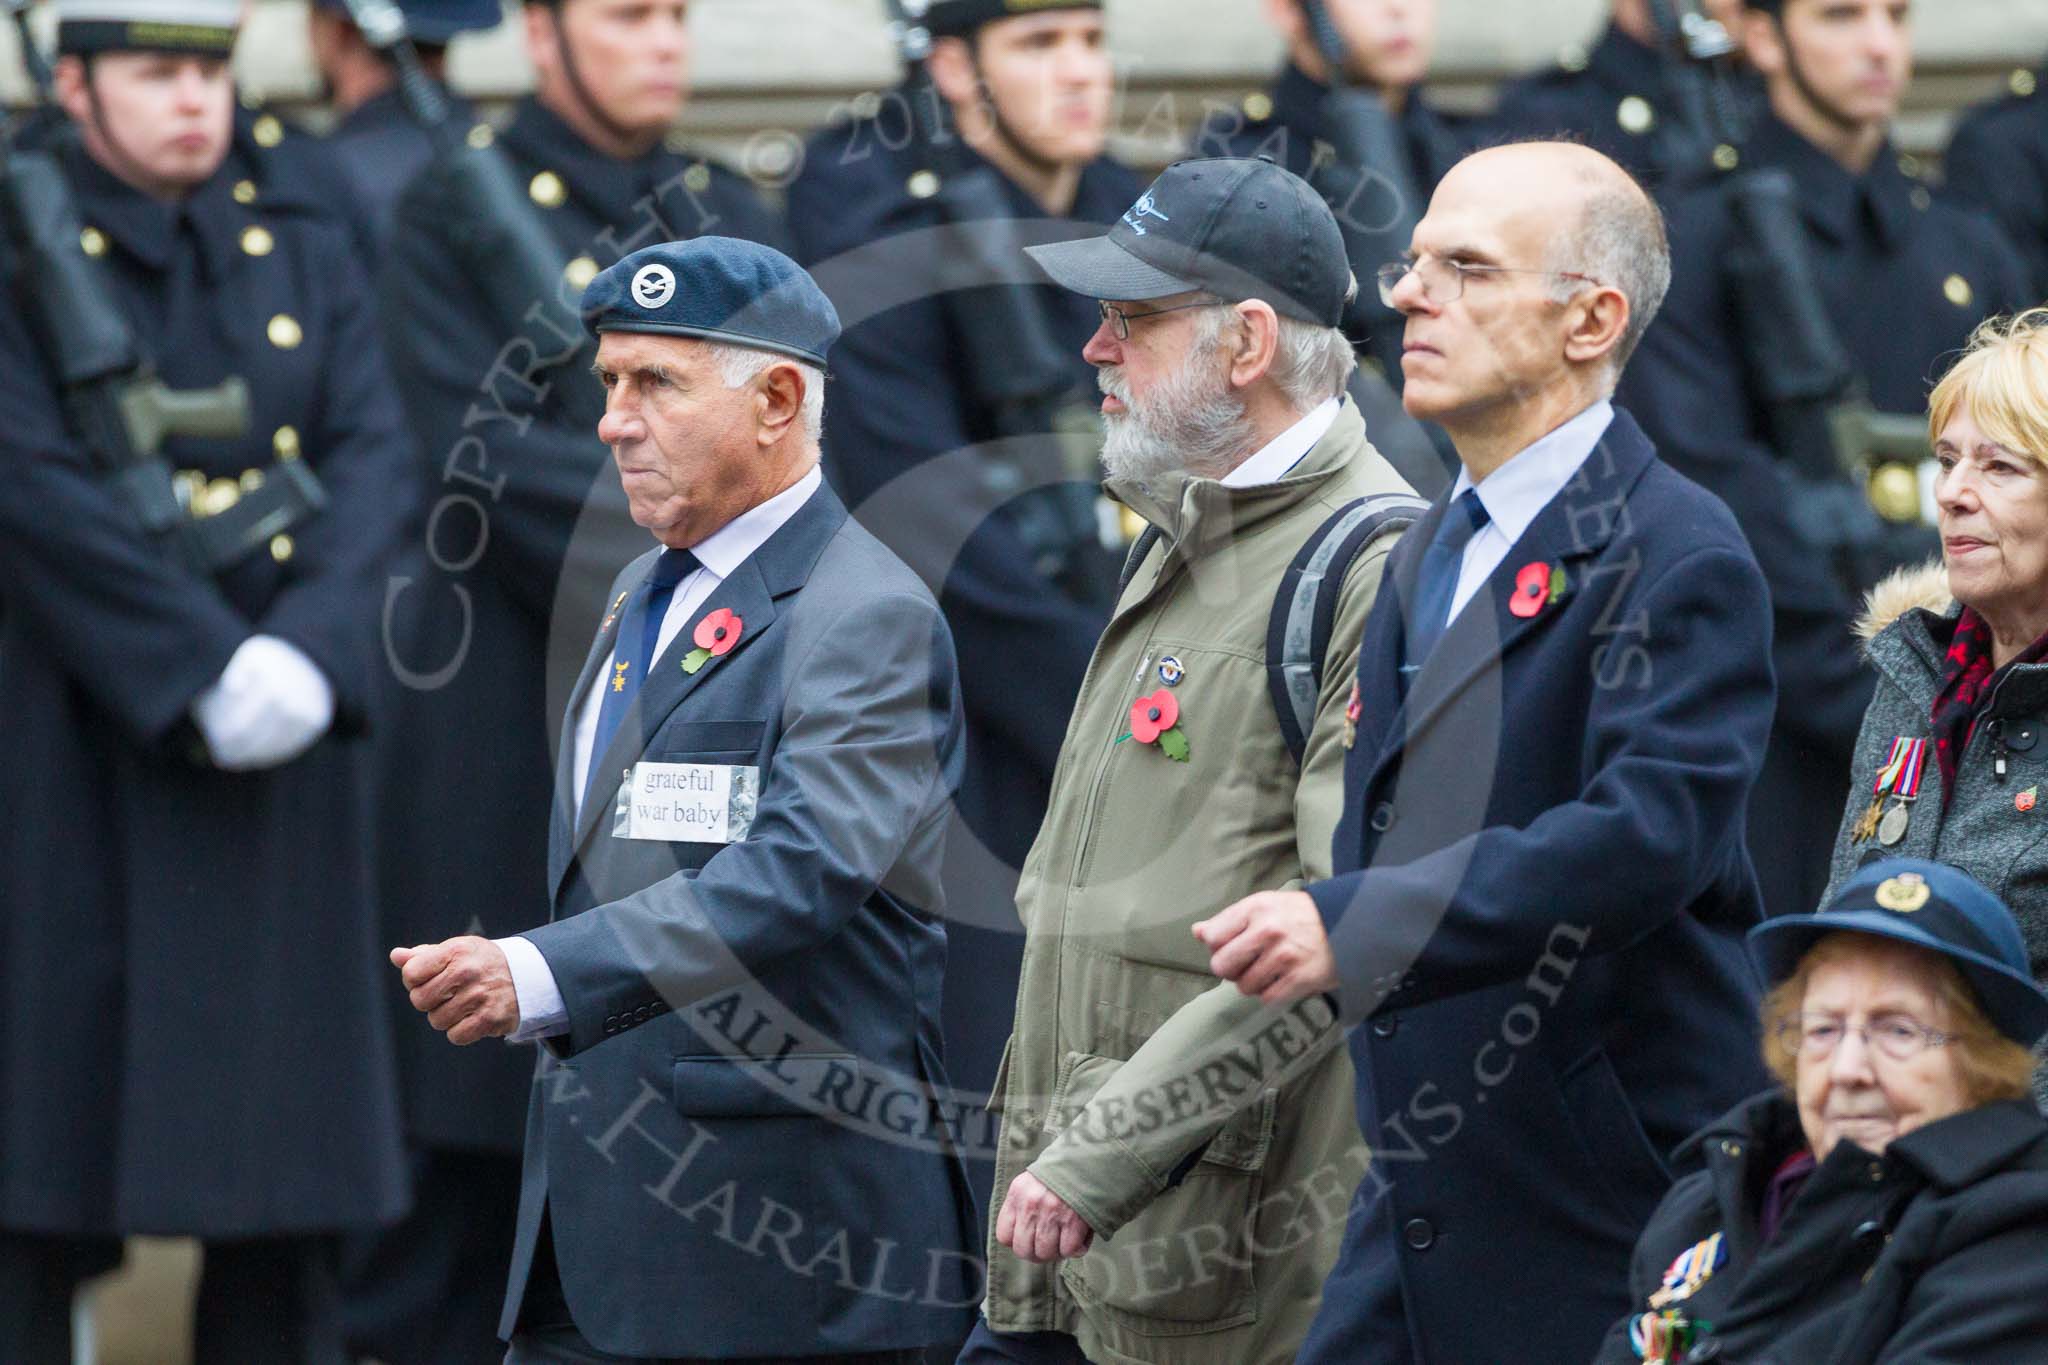 Remembrance Sunday at the Cenotaph 2015: Group C20, Coastal Command & Maritime Air Association.
Cenotaph, Whitehall, London SW1,
London,
Greater London,
United Kingdom,
on 08 November 2015 at 11:49, image #531